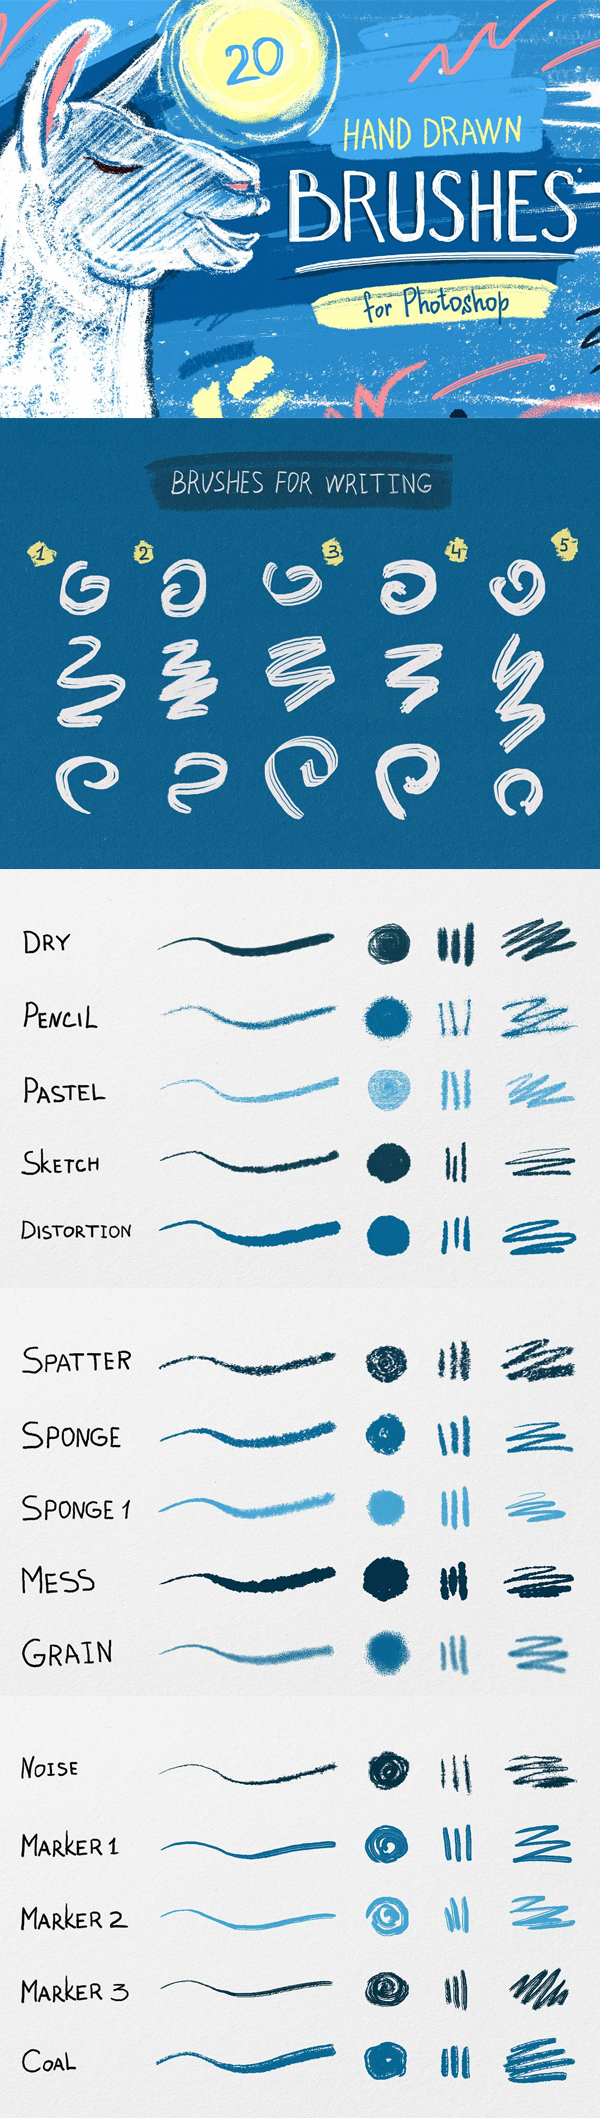 Hand Drawn Brushes for Photoshop